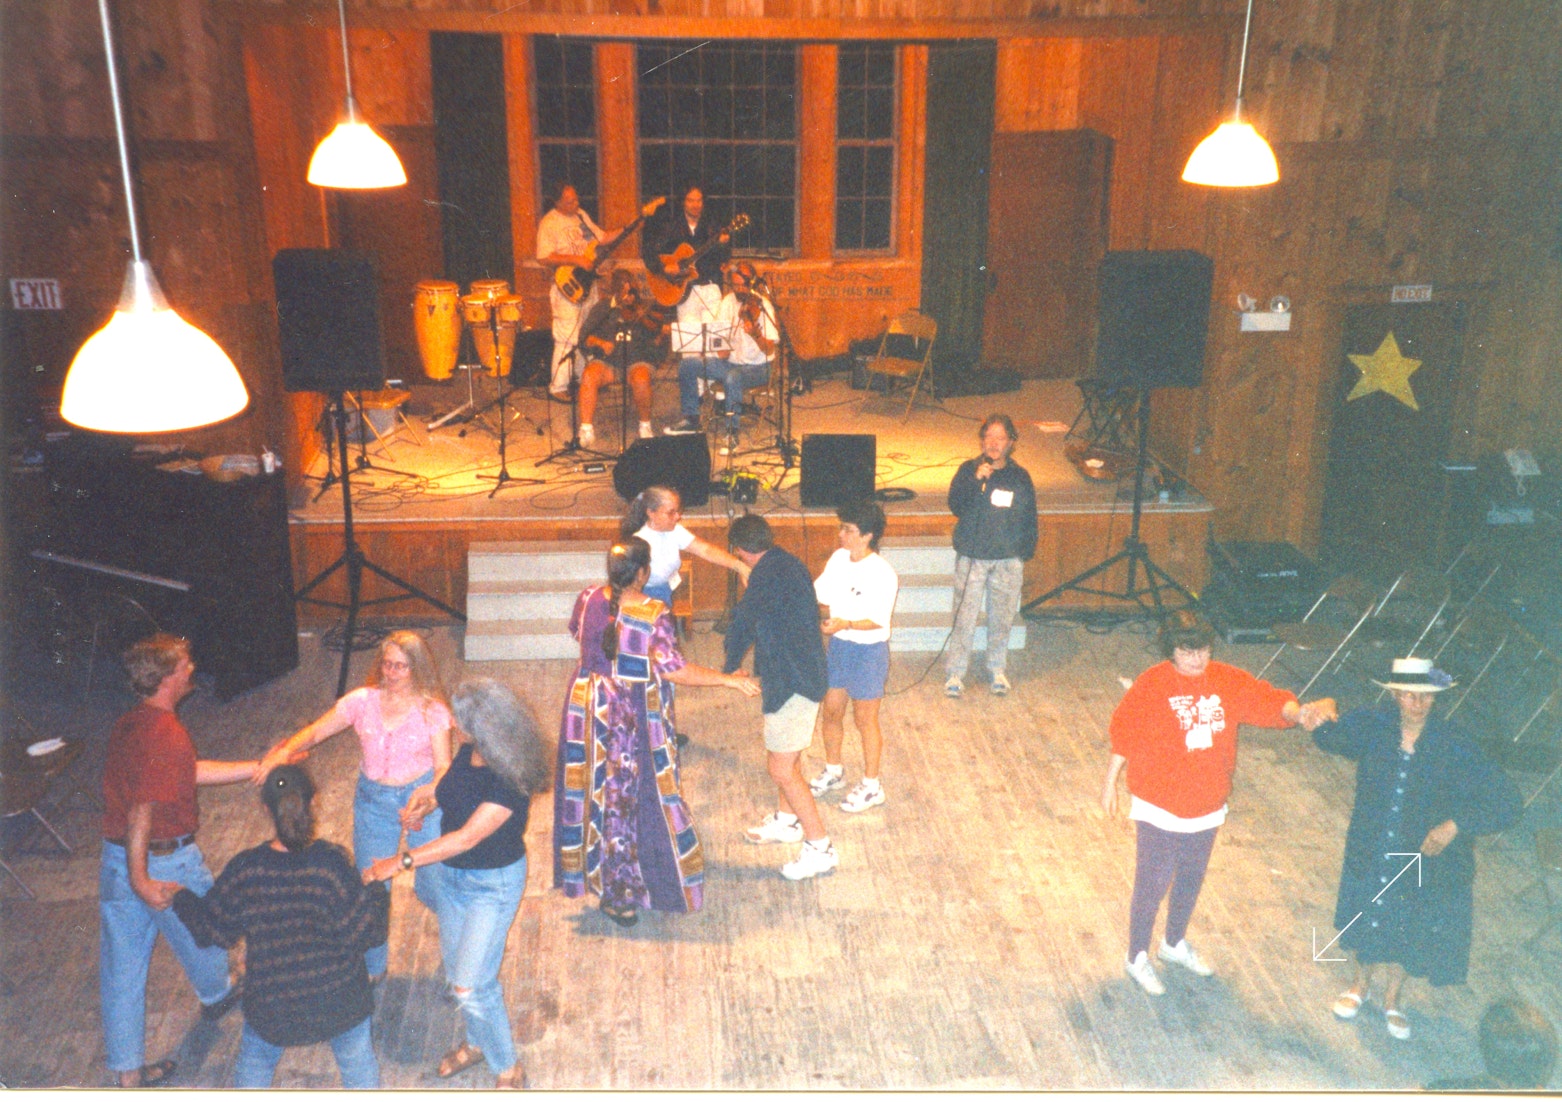 Ryan Thomson calling the Friday night dance at the SAMW music camp in 1987 at Geneva Point, New Hampshire.